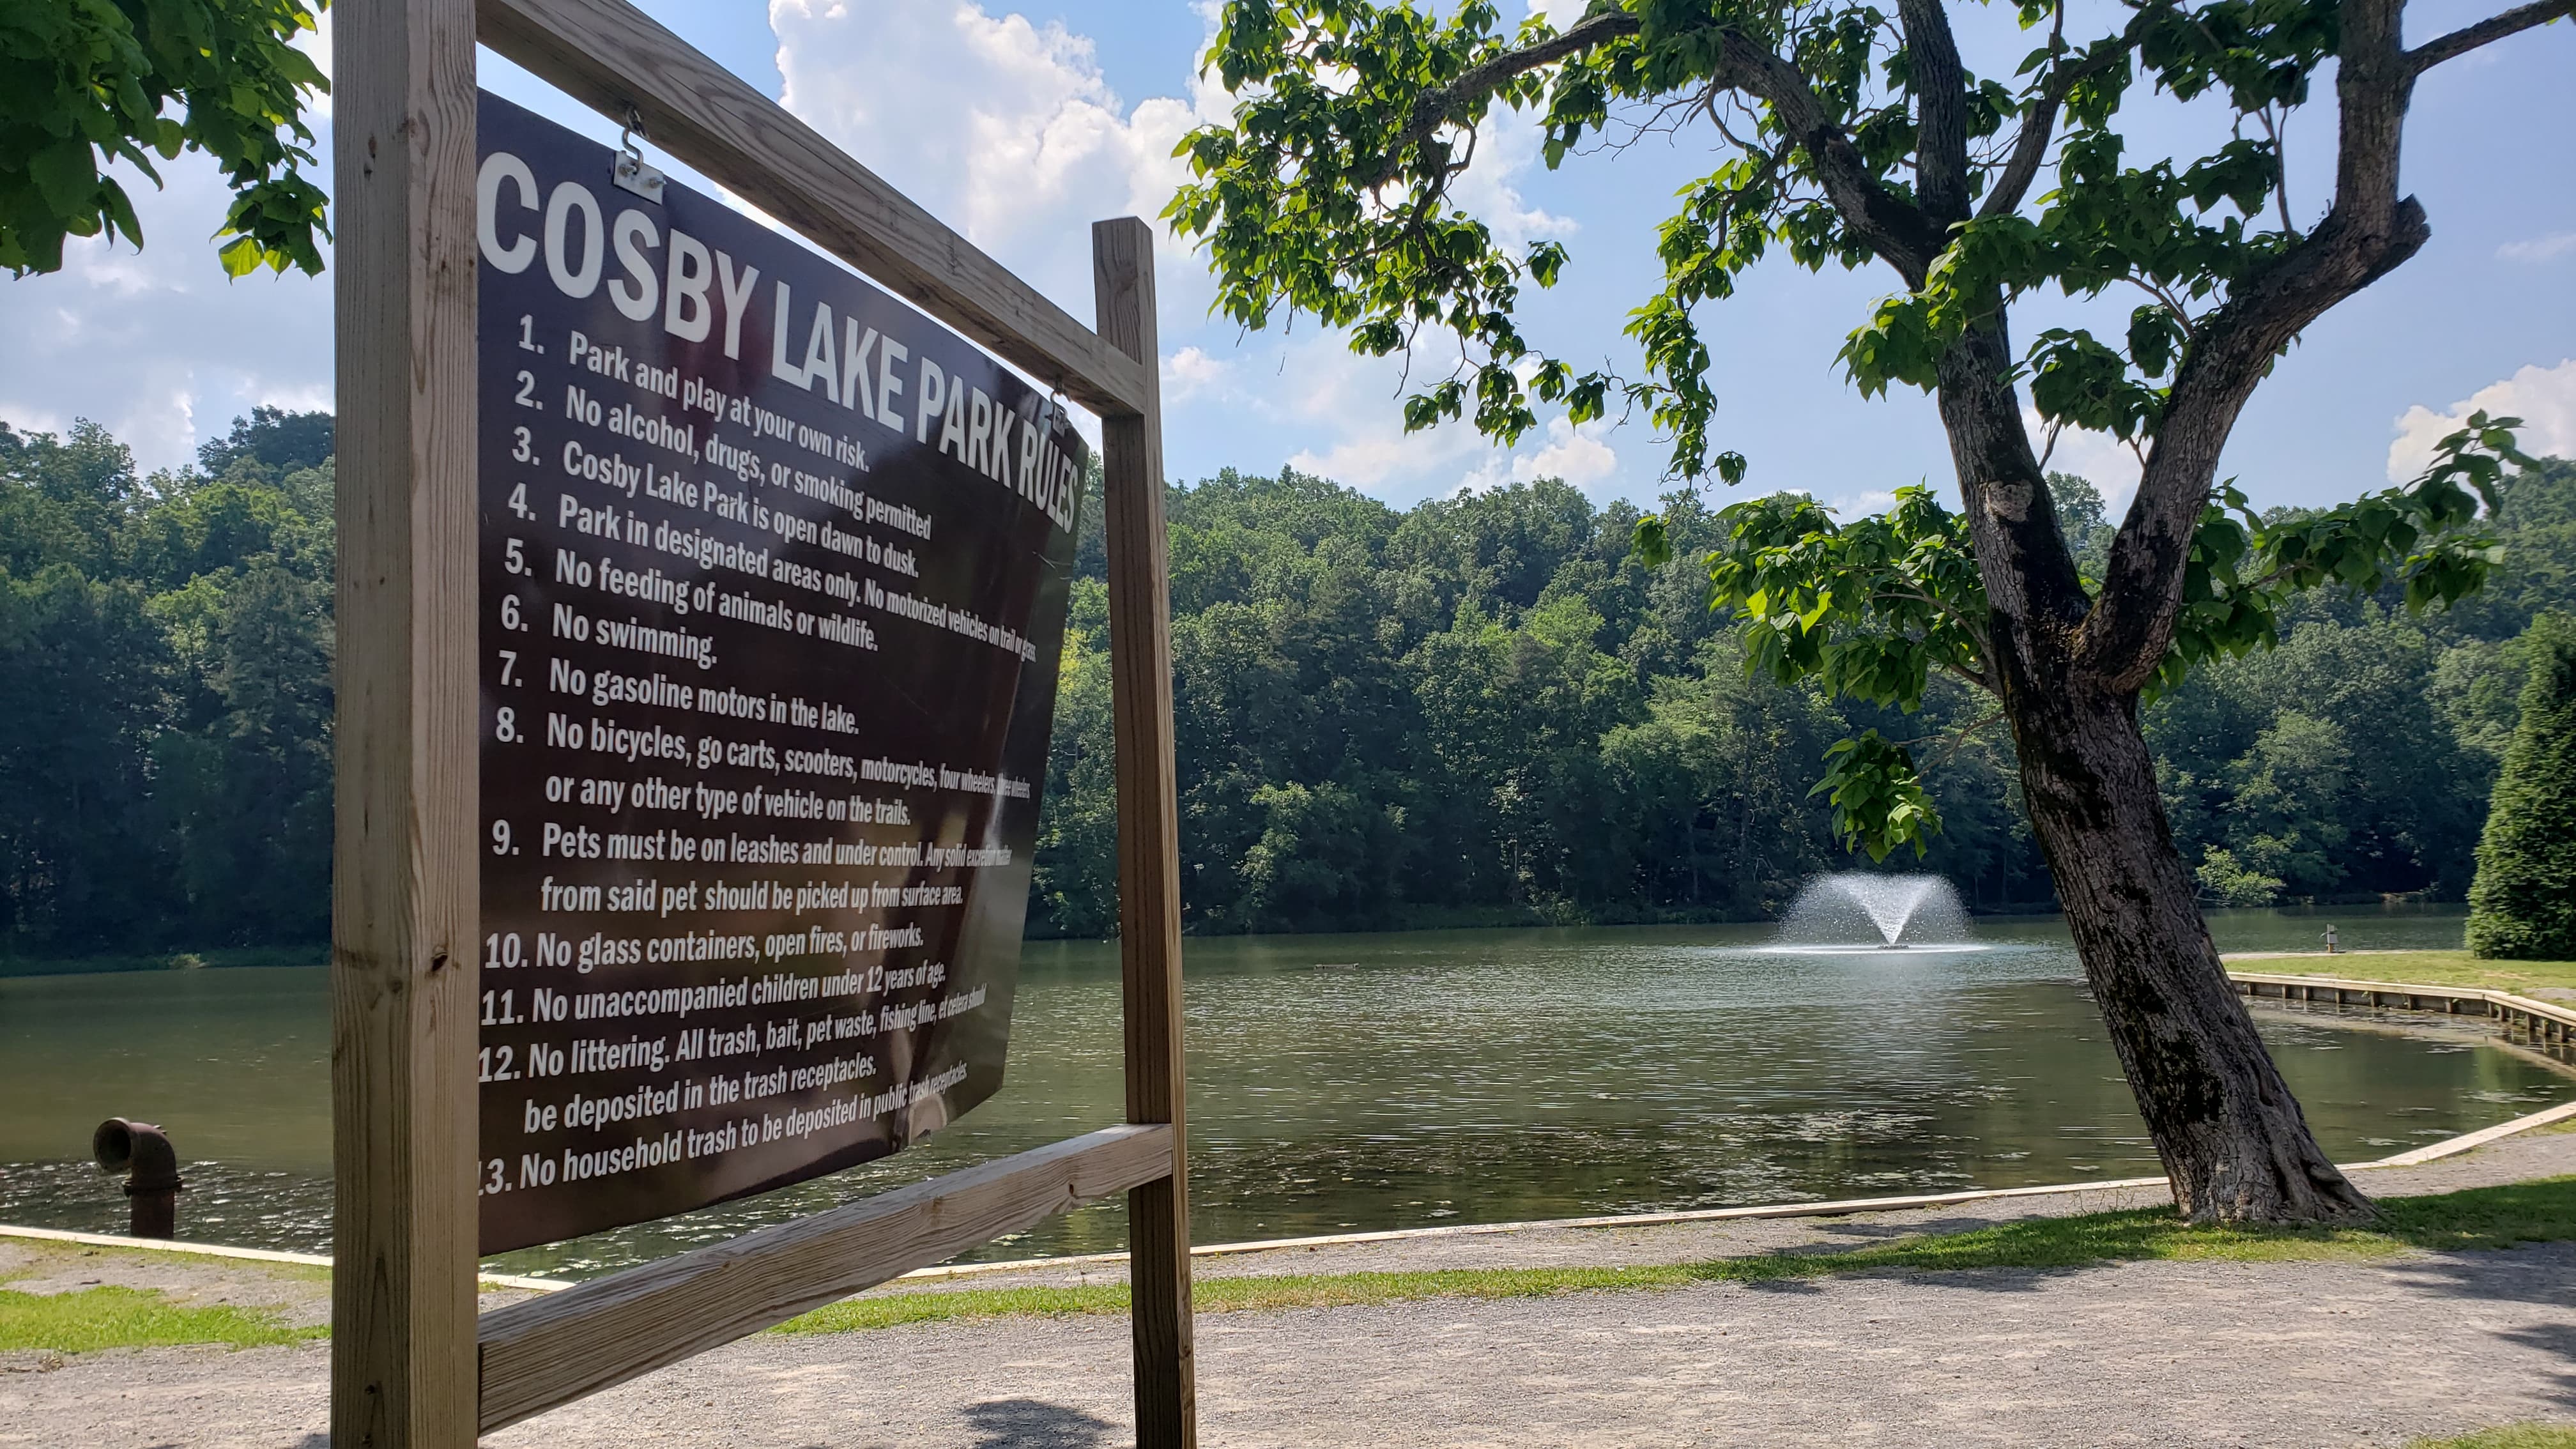 City of Clay closes Cosby Lake, other public facilities